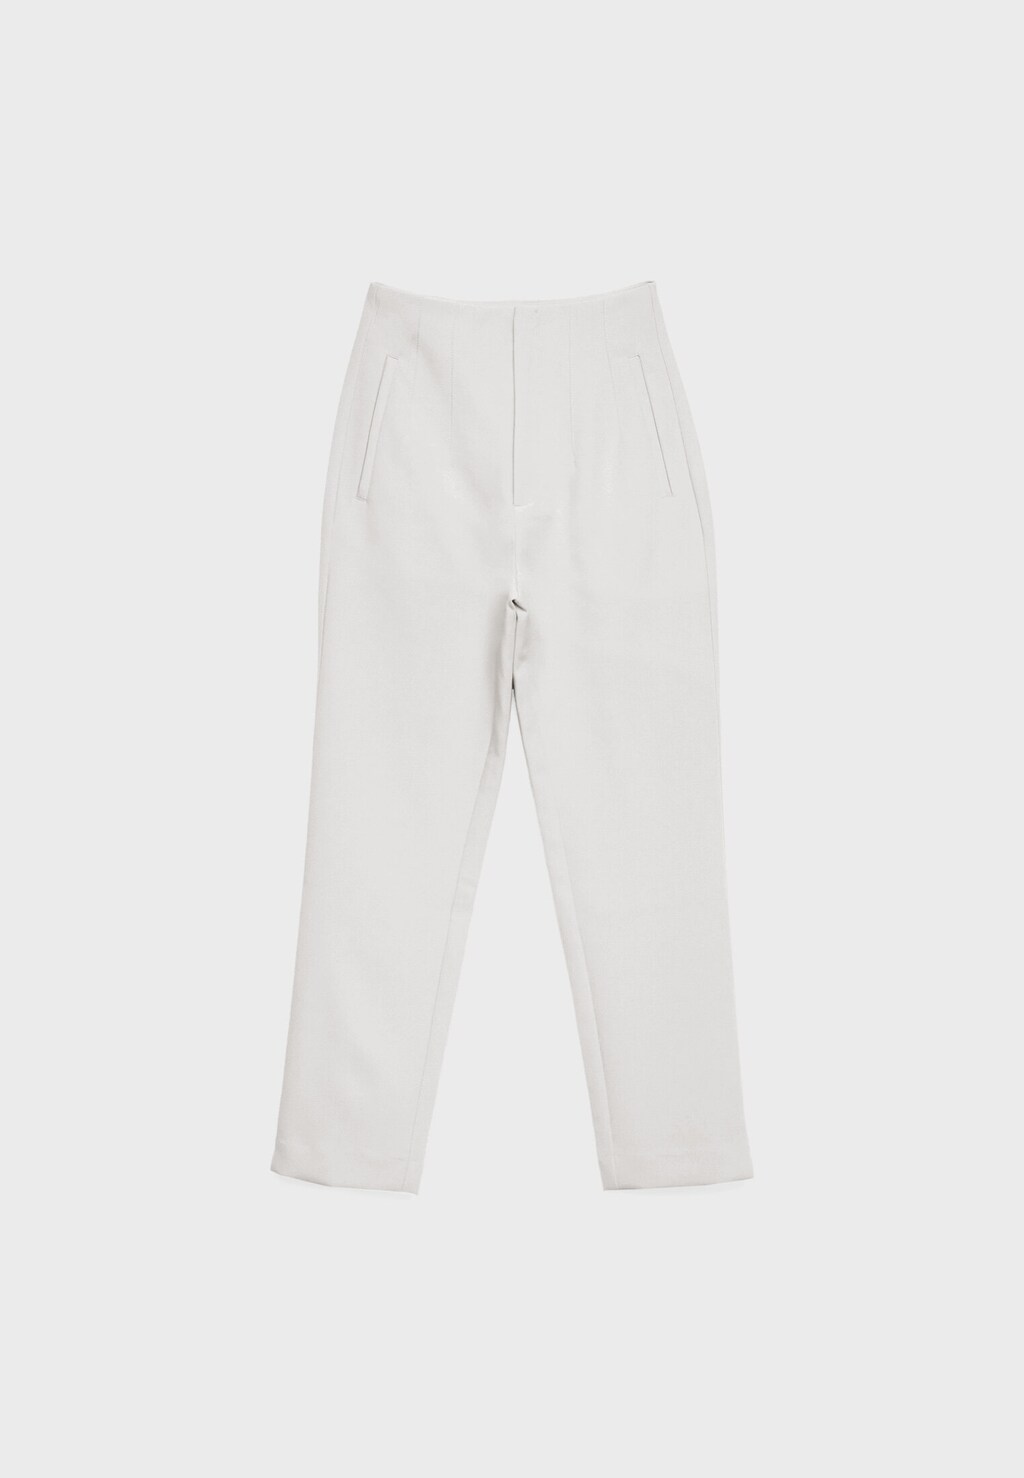 Smart trousers with contrast waistband - Women's fashion